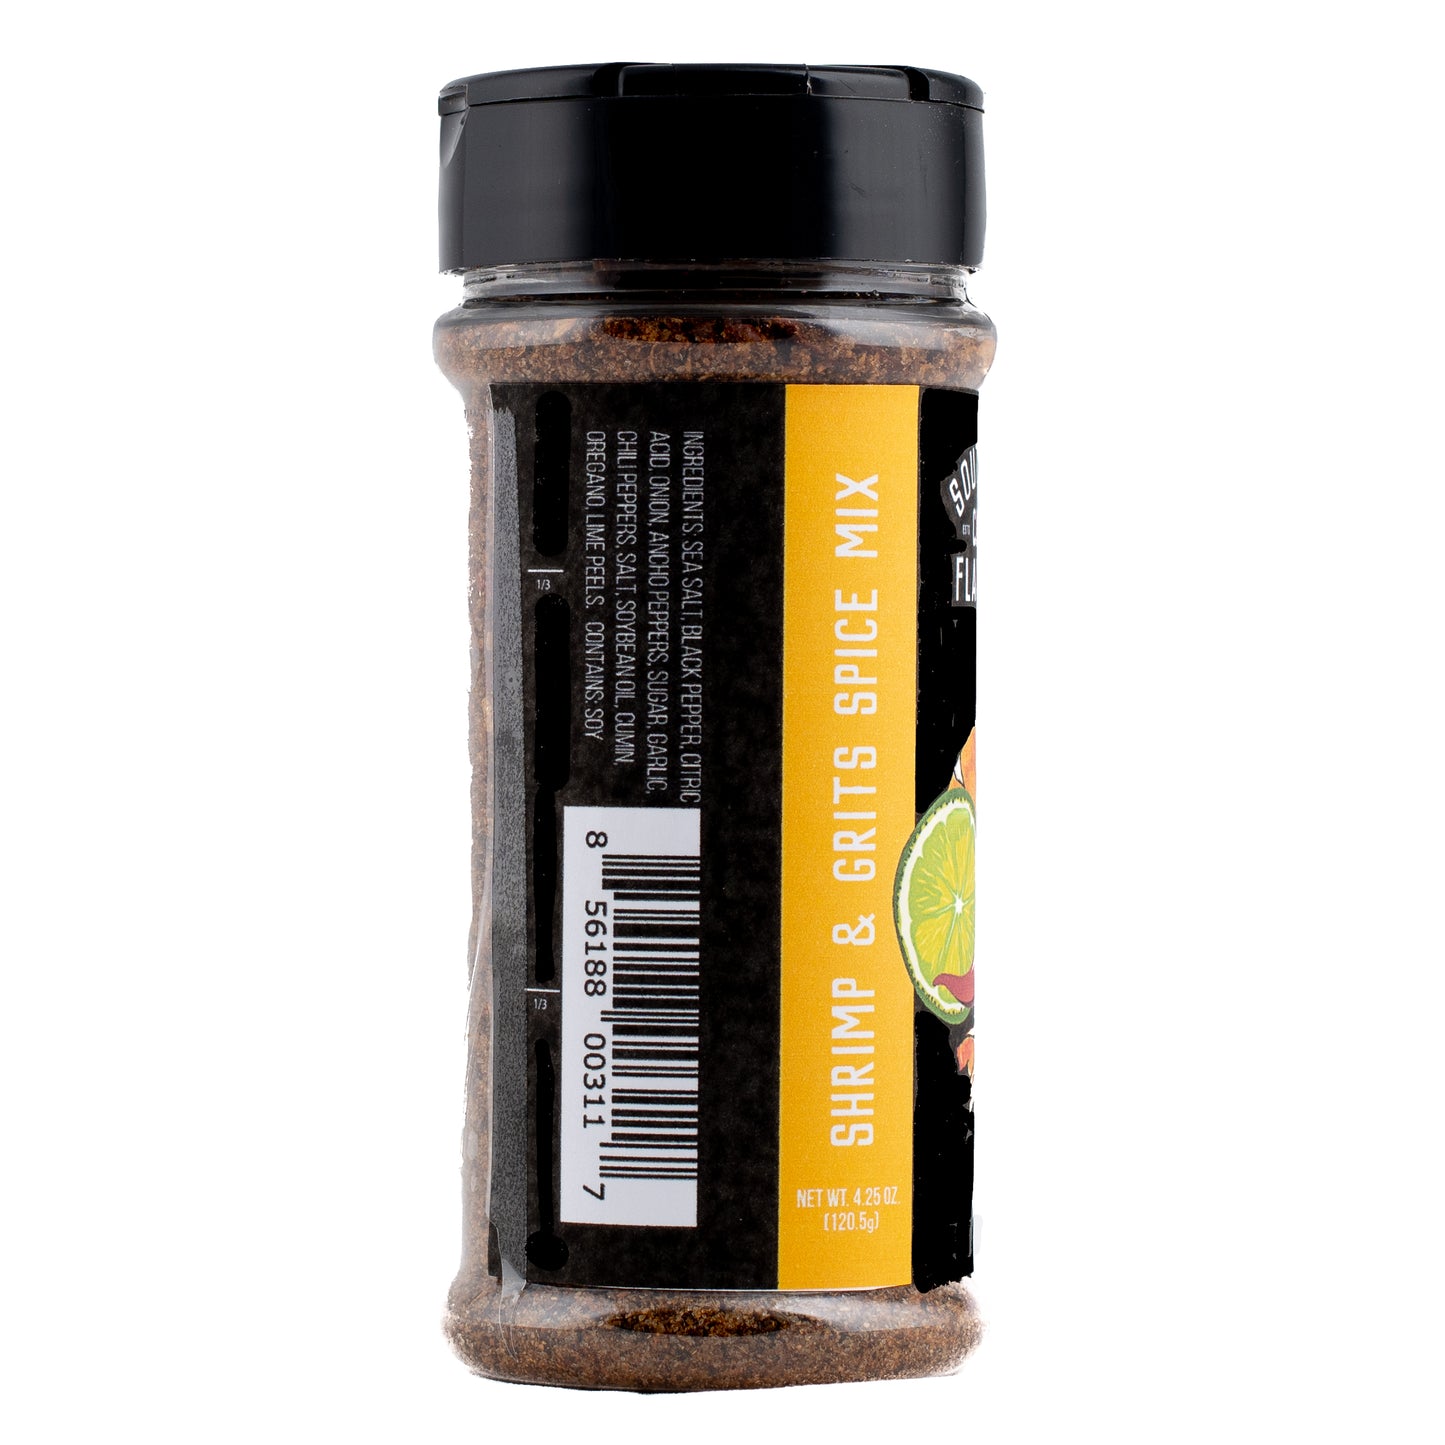 Shrimp and Grits Spice Mix